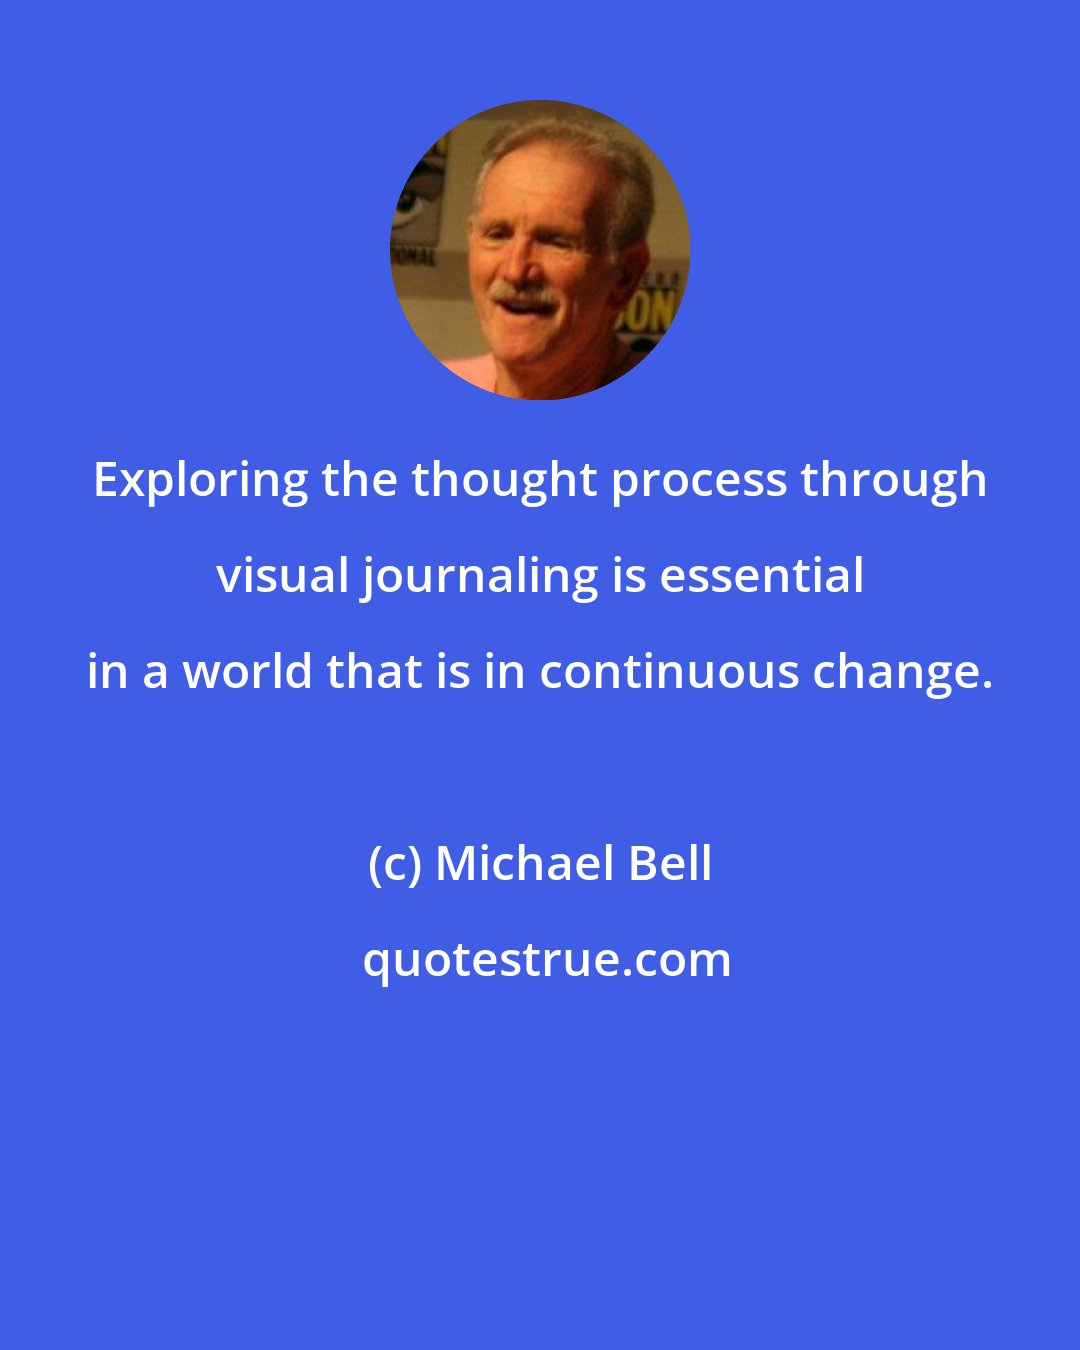 Michael Bell: Exploring the thought process through visual journaling is essential in a world that is in continuous change.